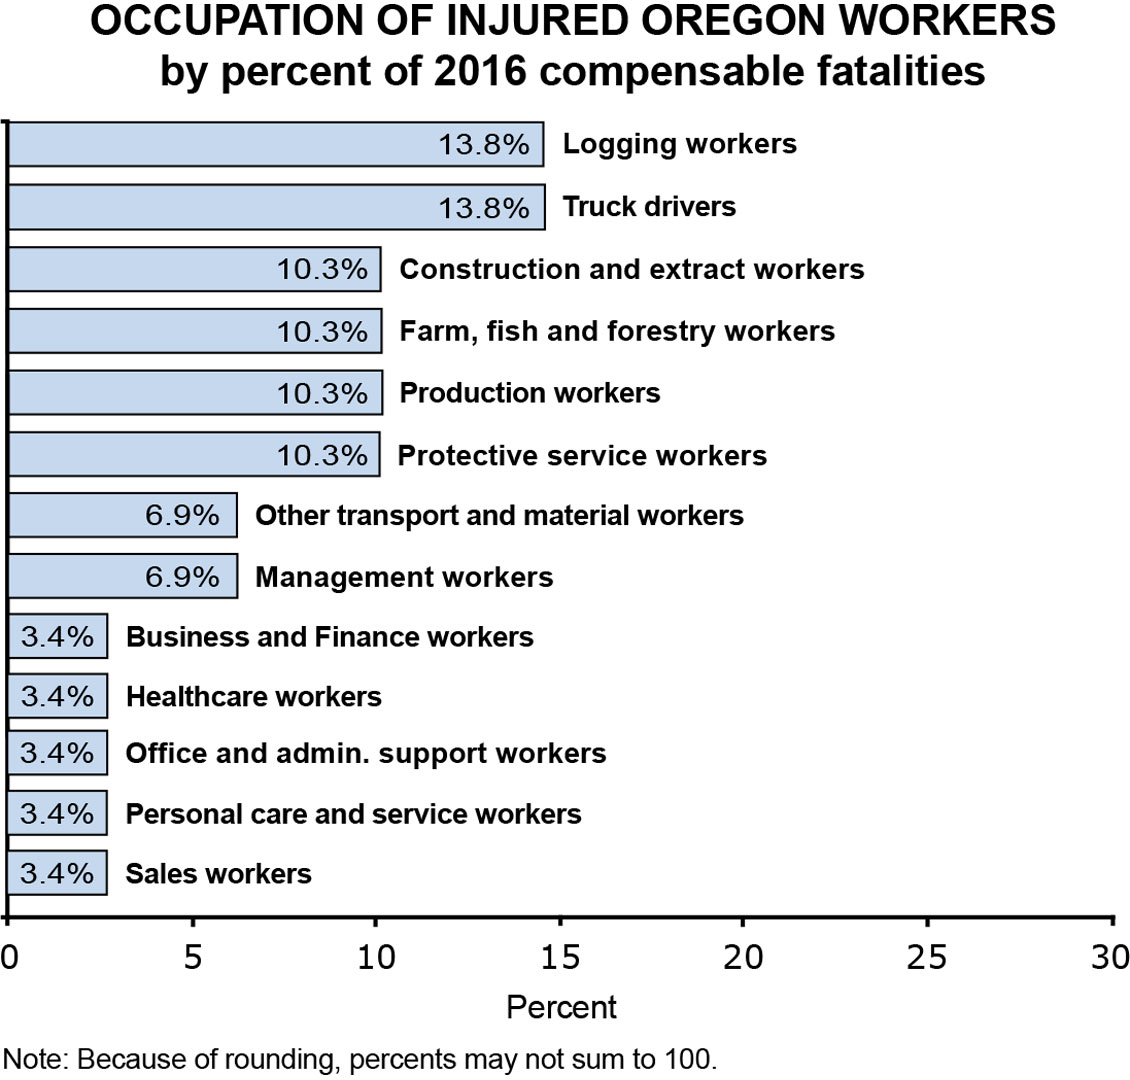 Occupation of Oregon Injured Workers